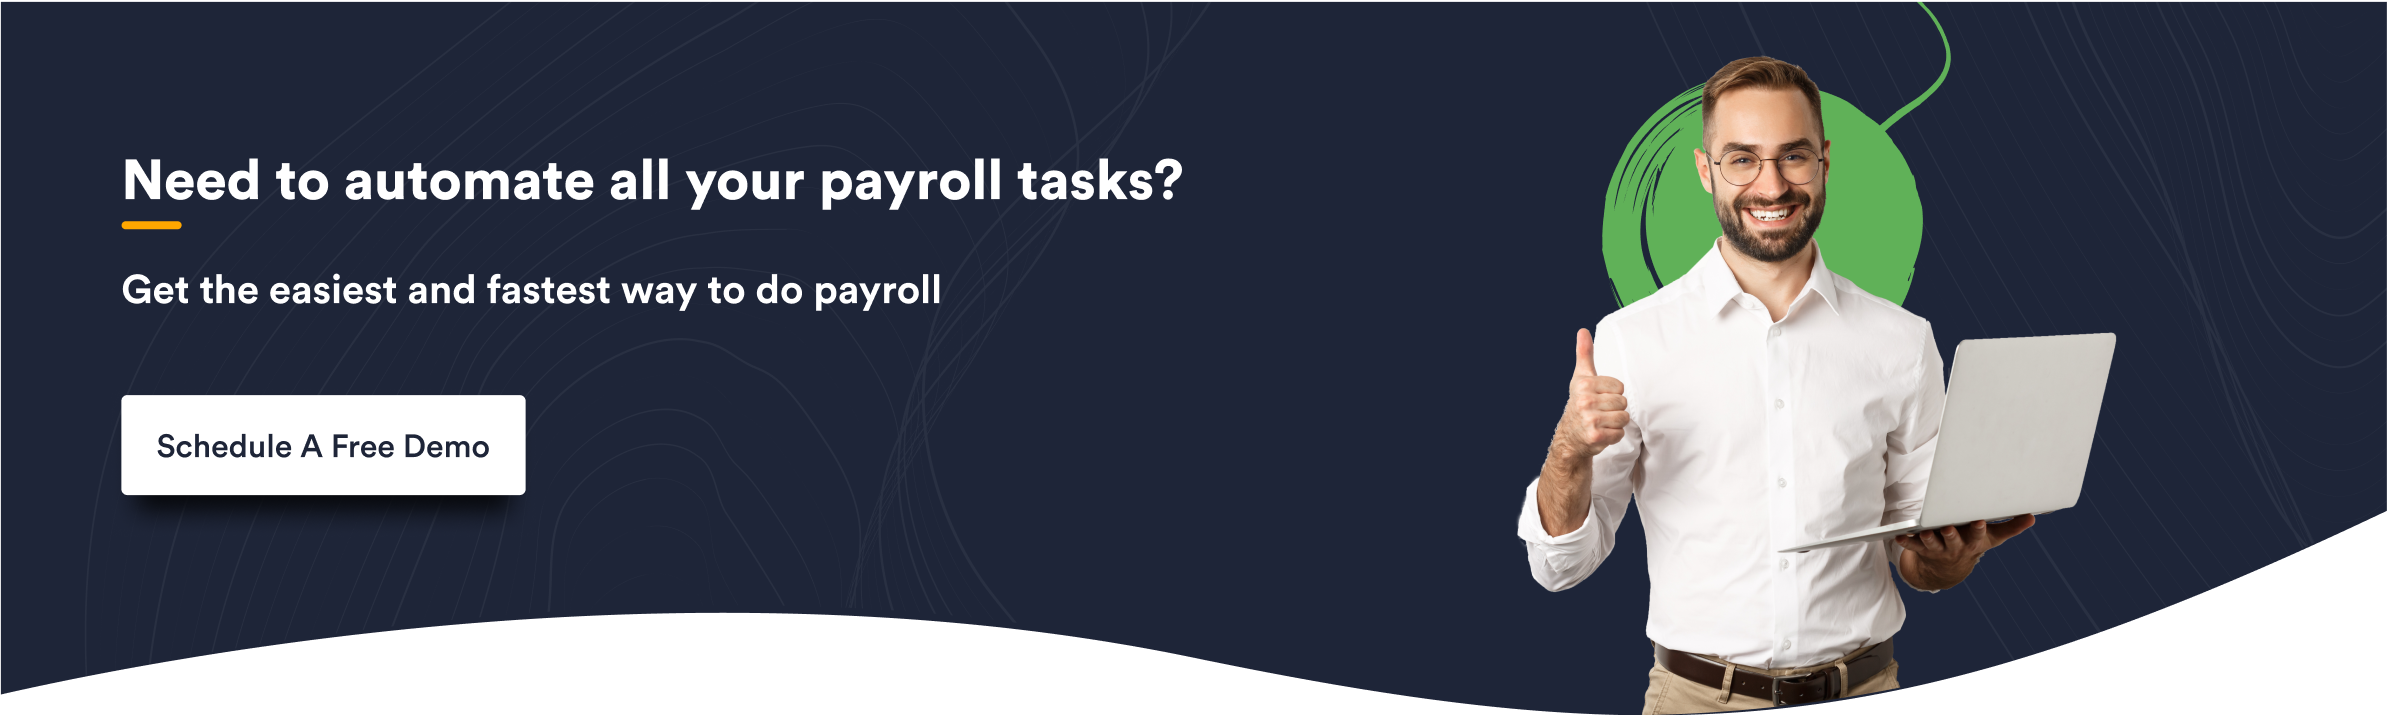 Need to automate all your payroll tasks